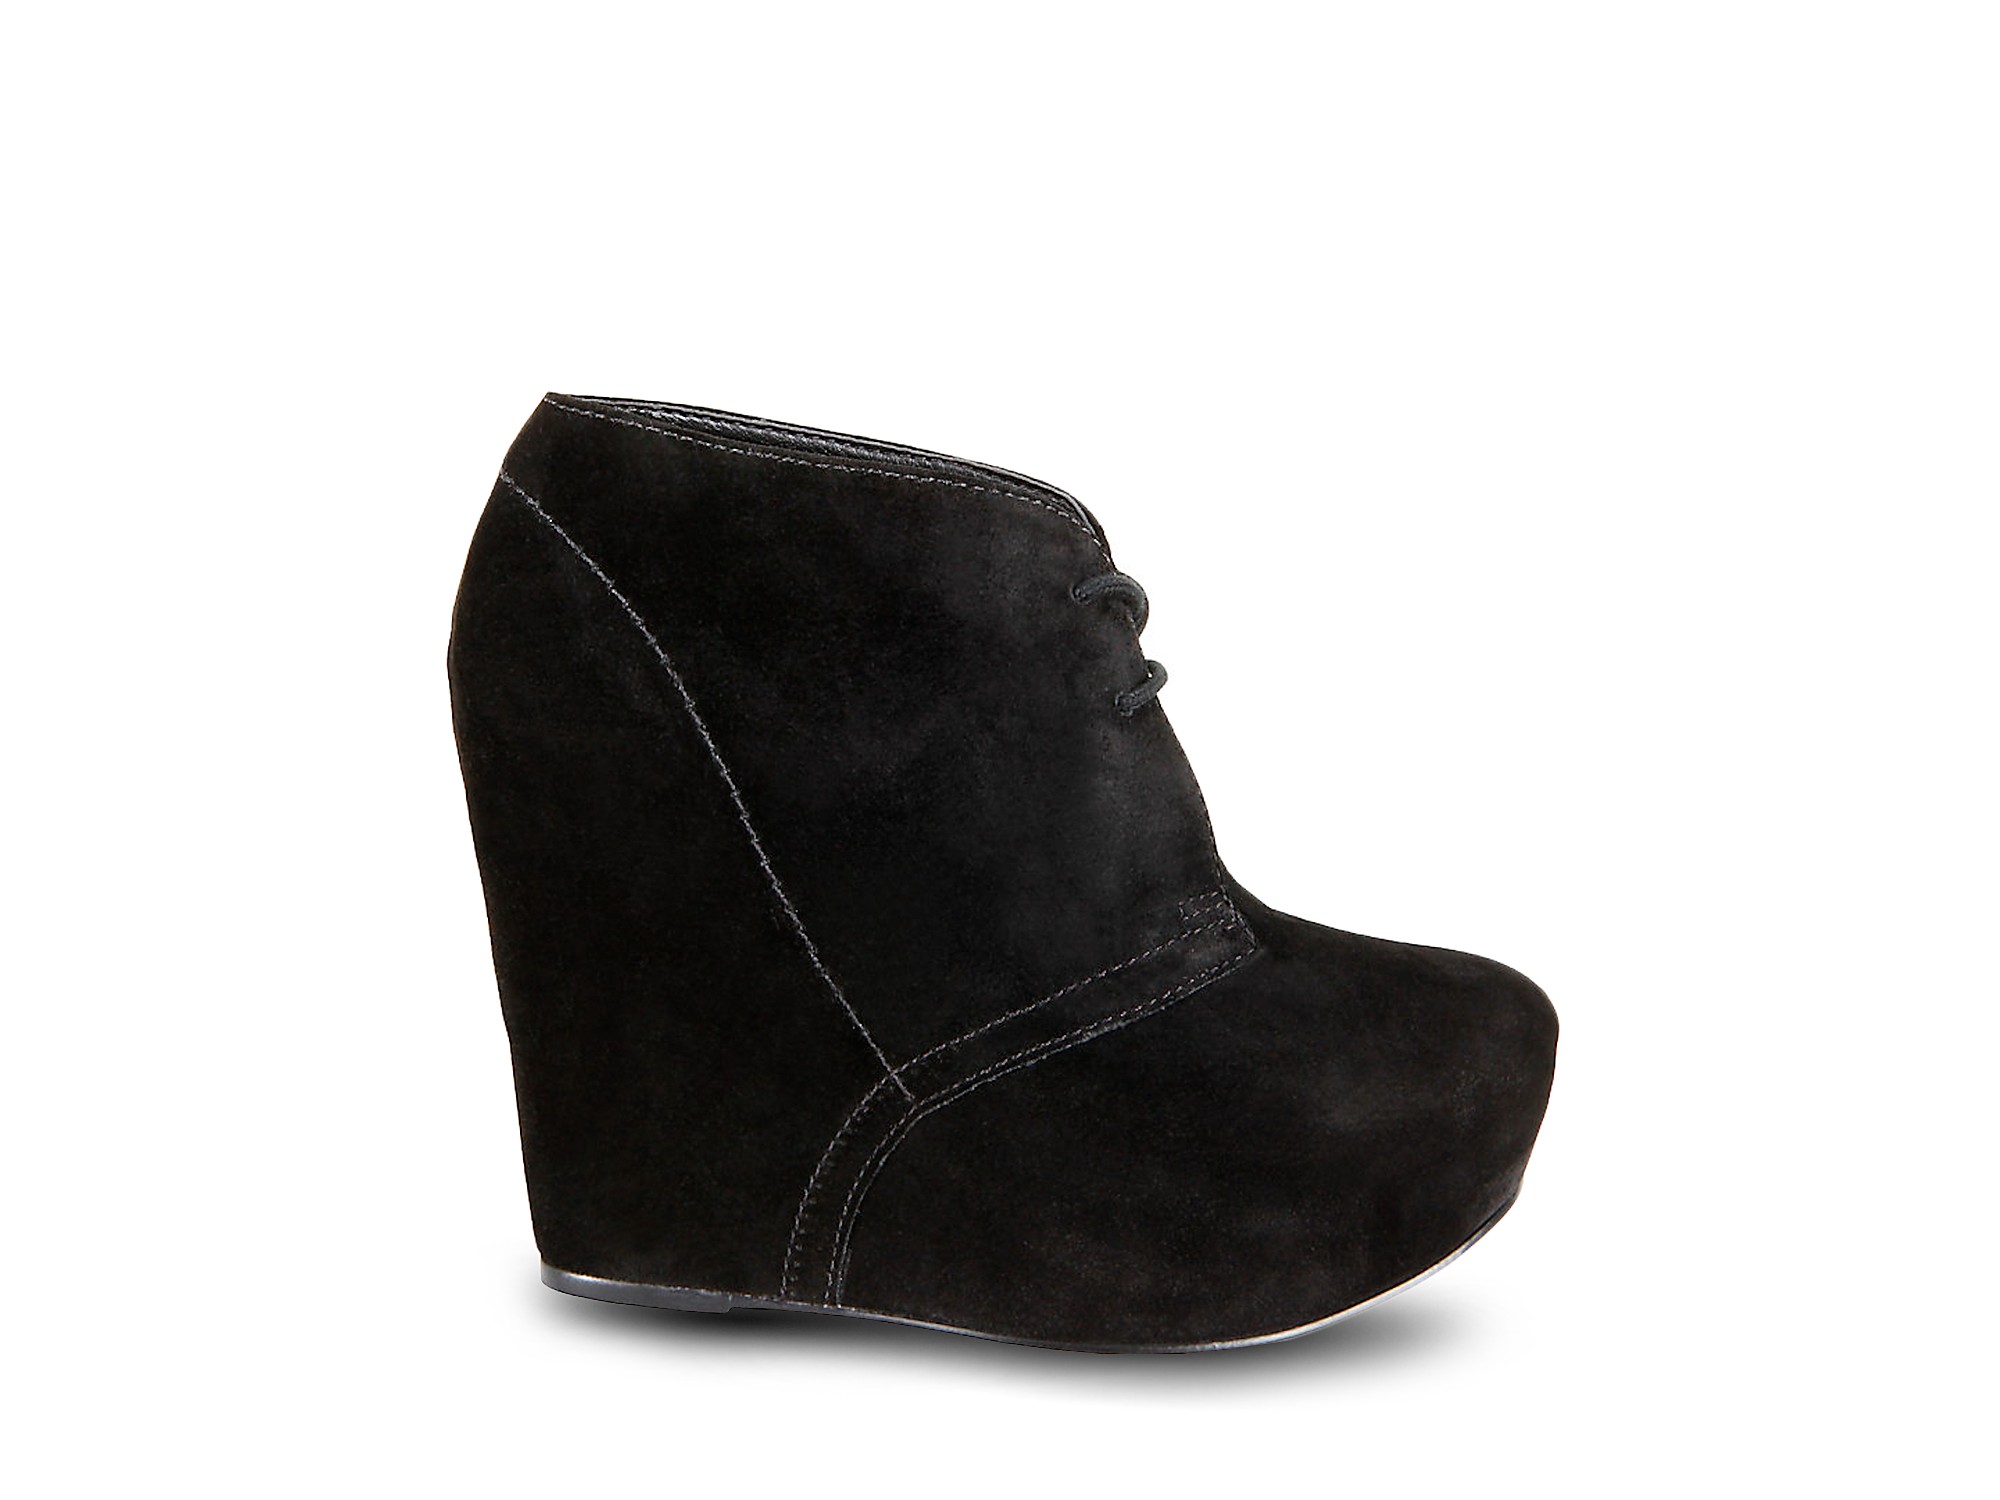 Steve Madden Annnie Wedge Booties in Taupe Suede (Brown) - Lyst